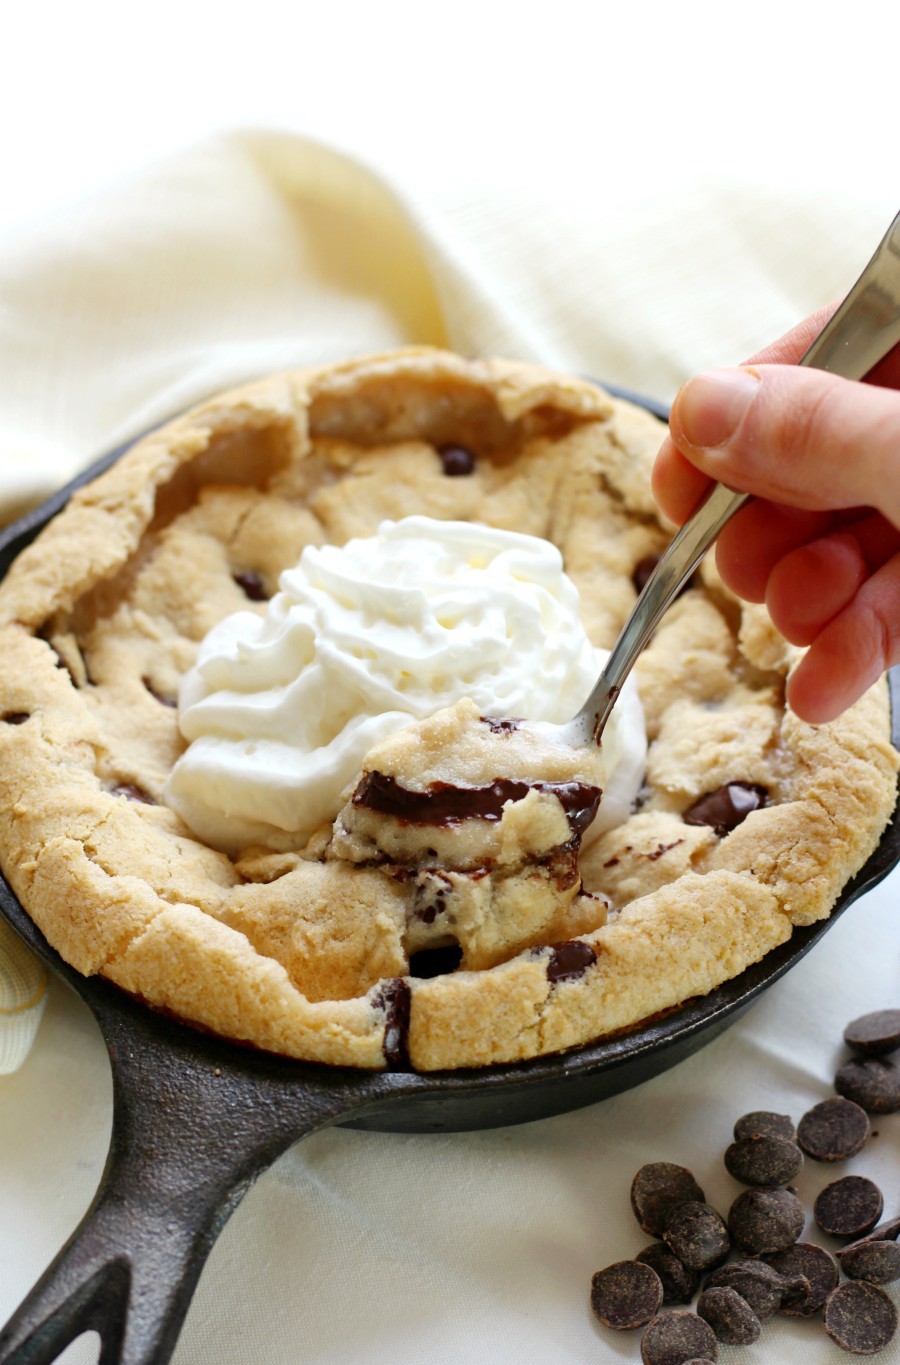 hand-with-spoon-scooping-deep-dish-chocolate-chip-skillet-cookie